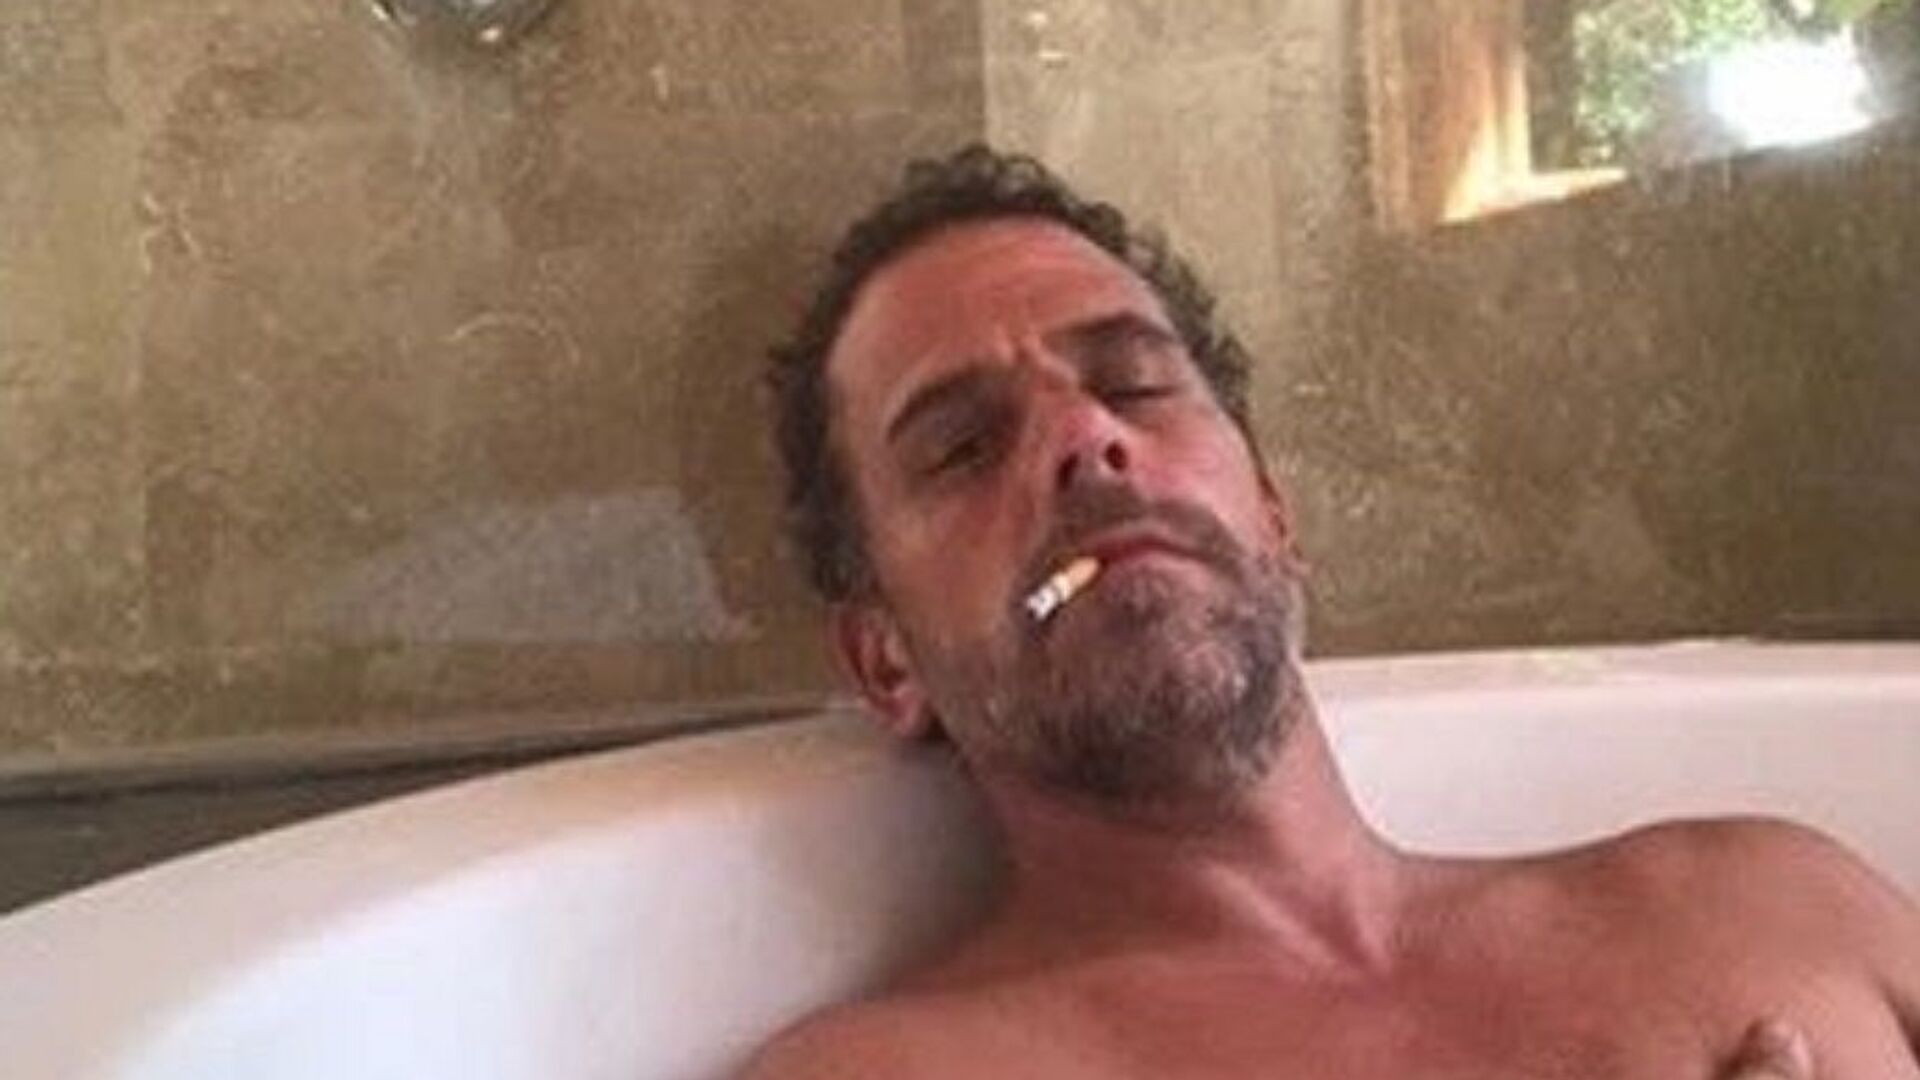 Photo of Hunter Biden relaxing in a bathtub, reportedly taken from a computer dropped off at a Delaware computer repair shop. - Sputnik International, 1920, 28.07.2022